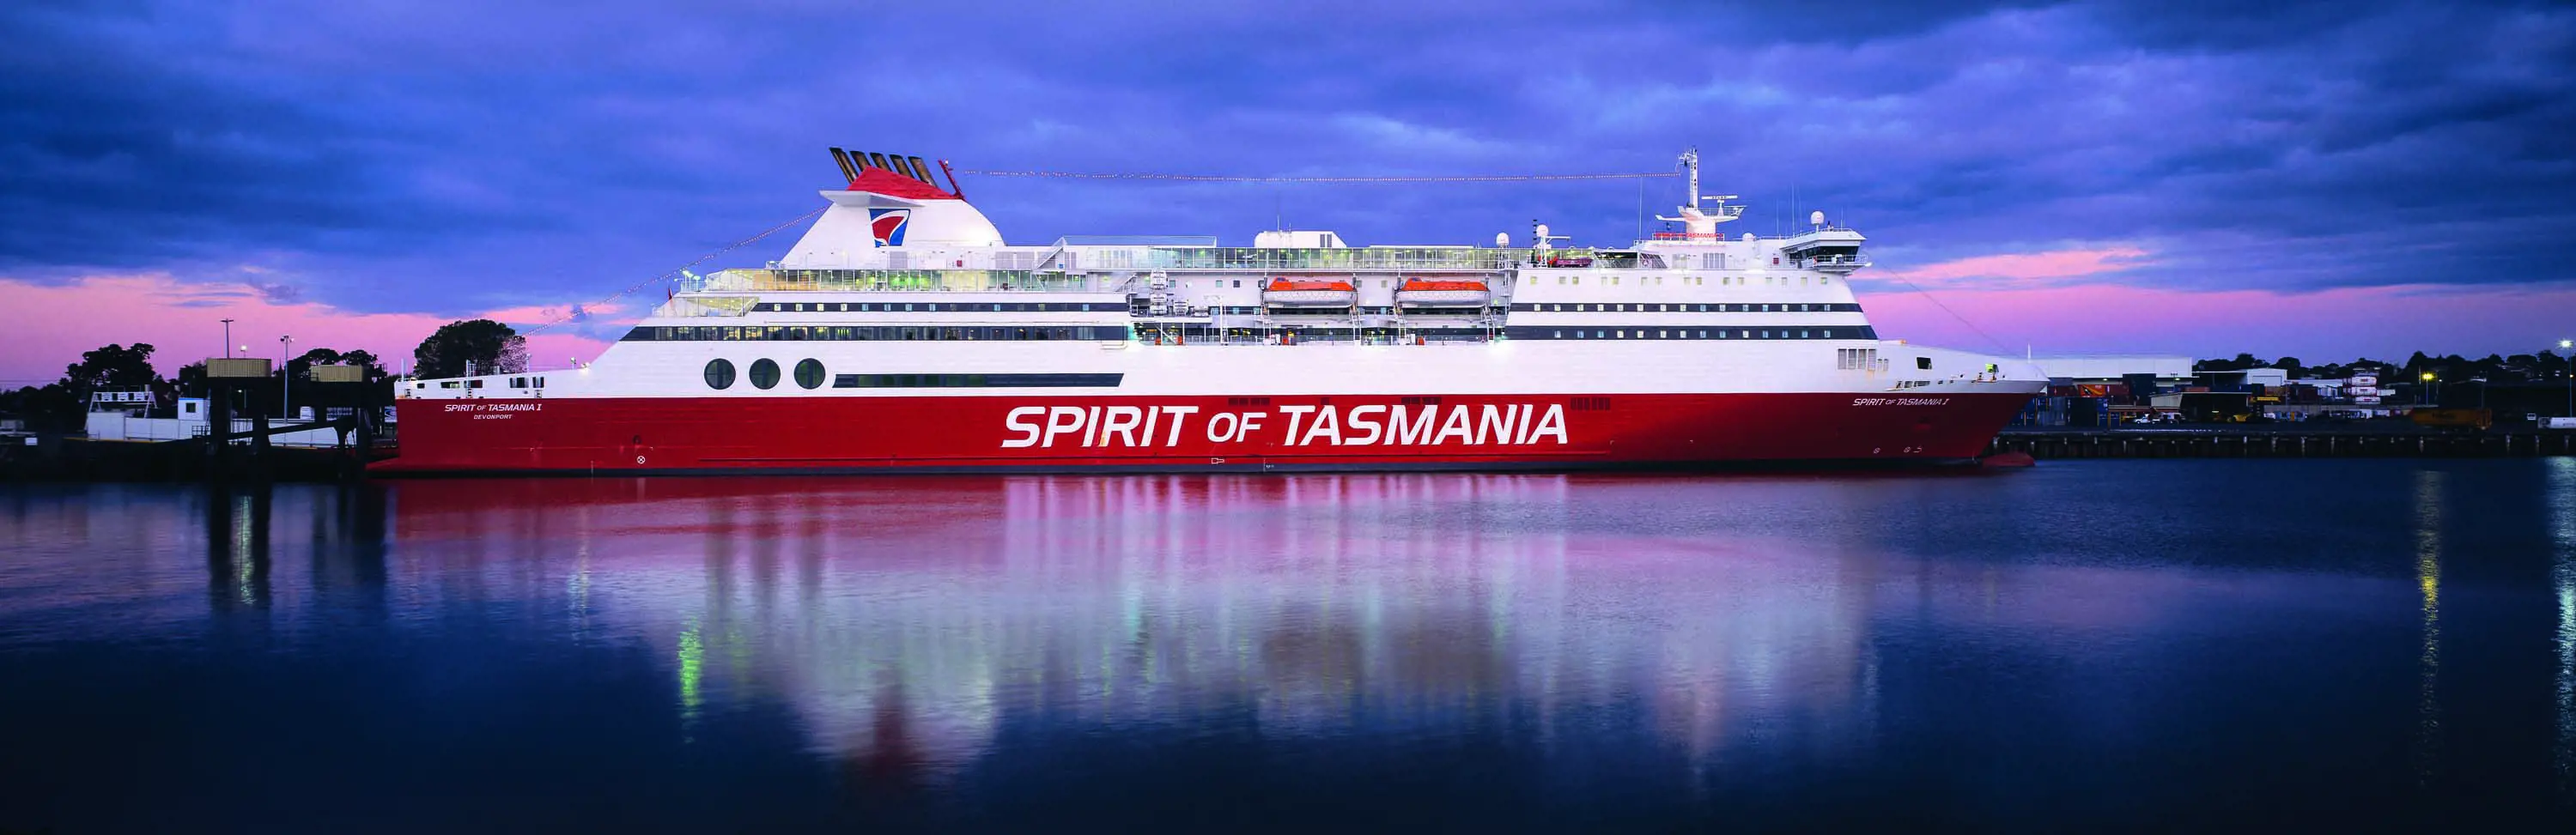 A long, red and white ferry with 3 stories, and white writing that reads Spirit of Tasmania along the side.